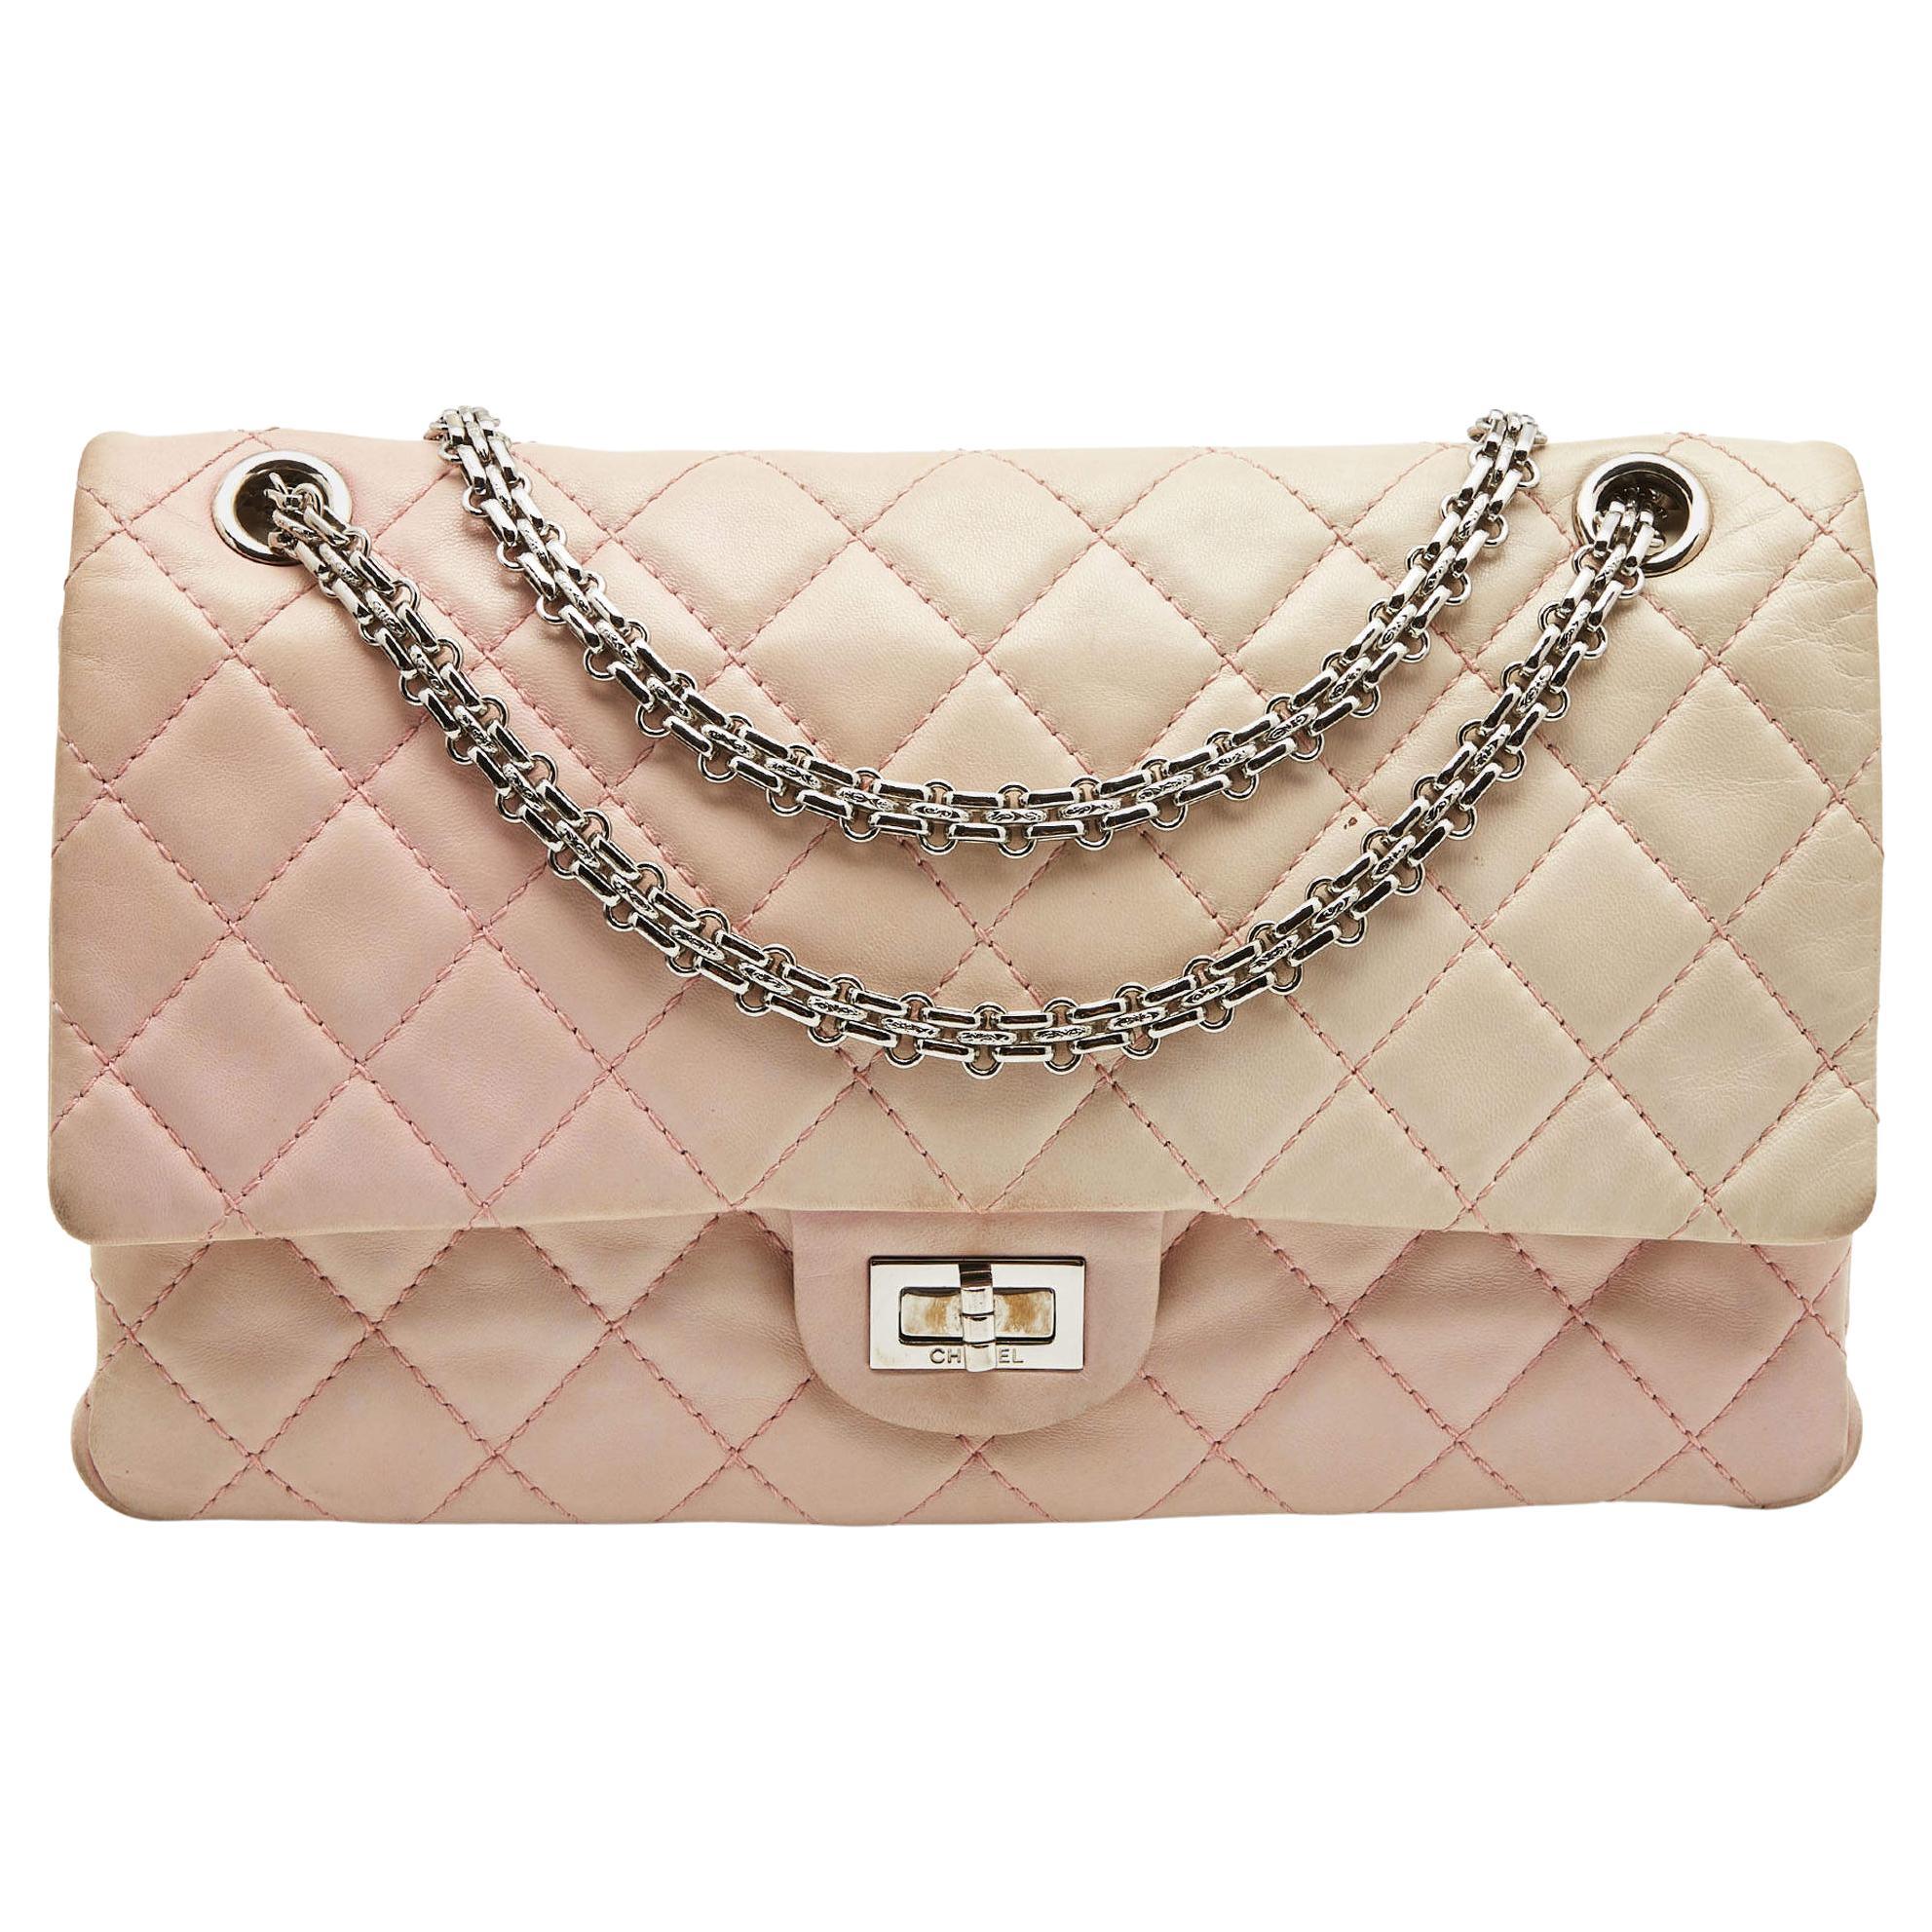 Chanel Pink Ombre Quilted Leather Reissue 2.55 Classic 226 Flap Bag For Sale